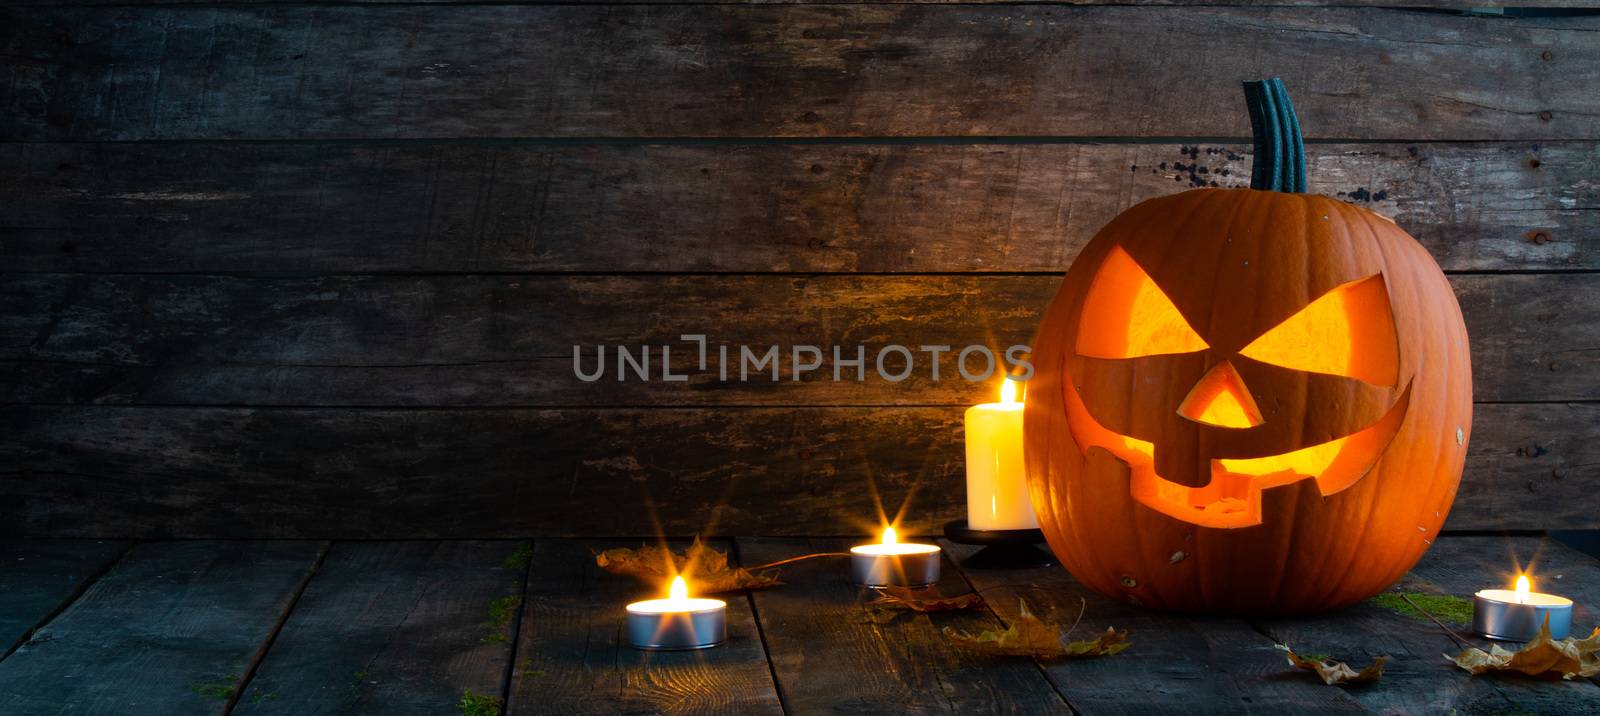 Halloween pumpkin head lantern burning candles and dry maple leaves on wooden background